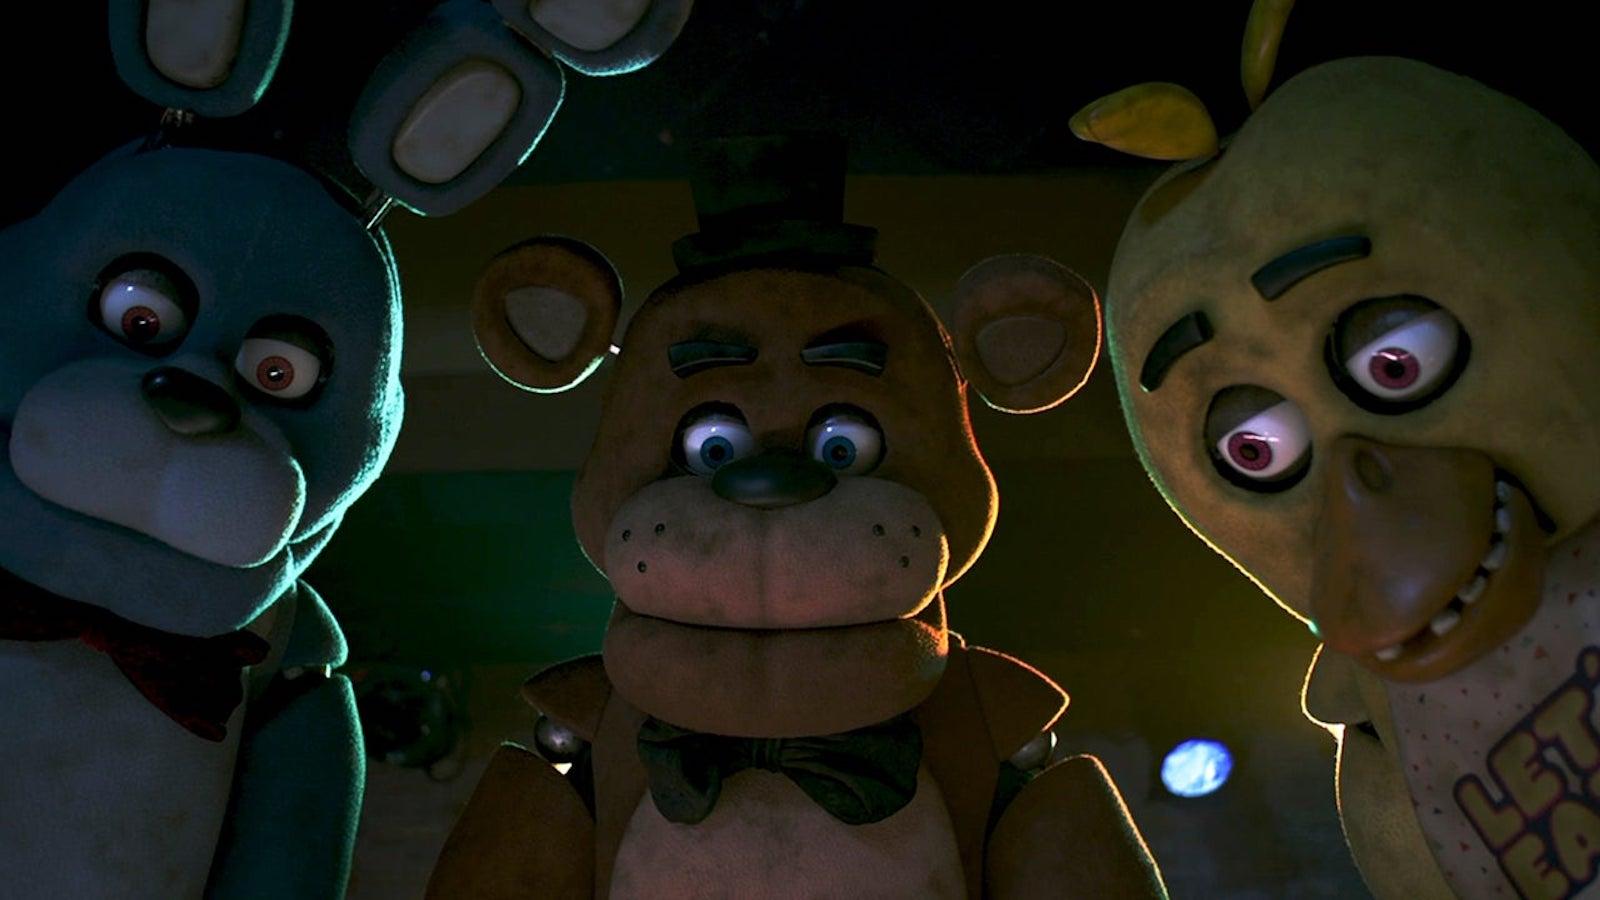 Still from the Five Nights at Freddy's movie